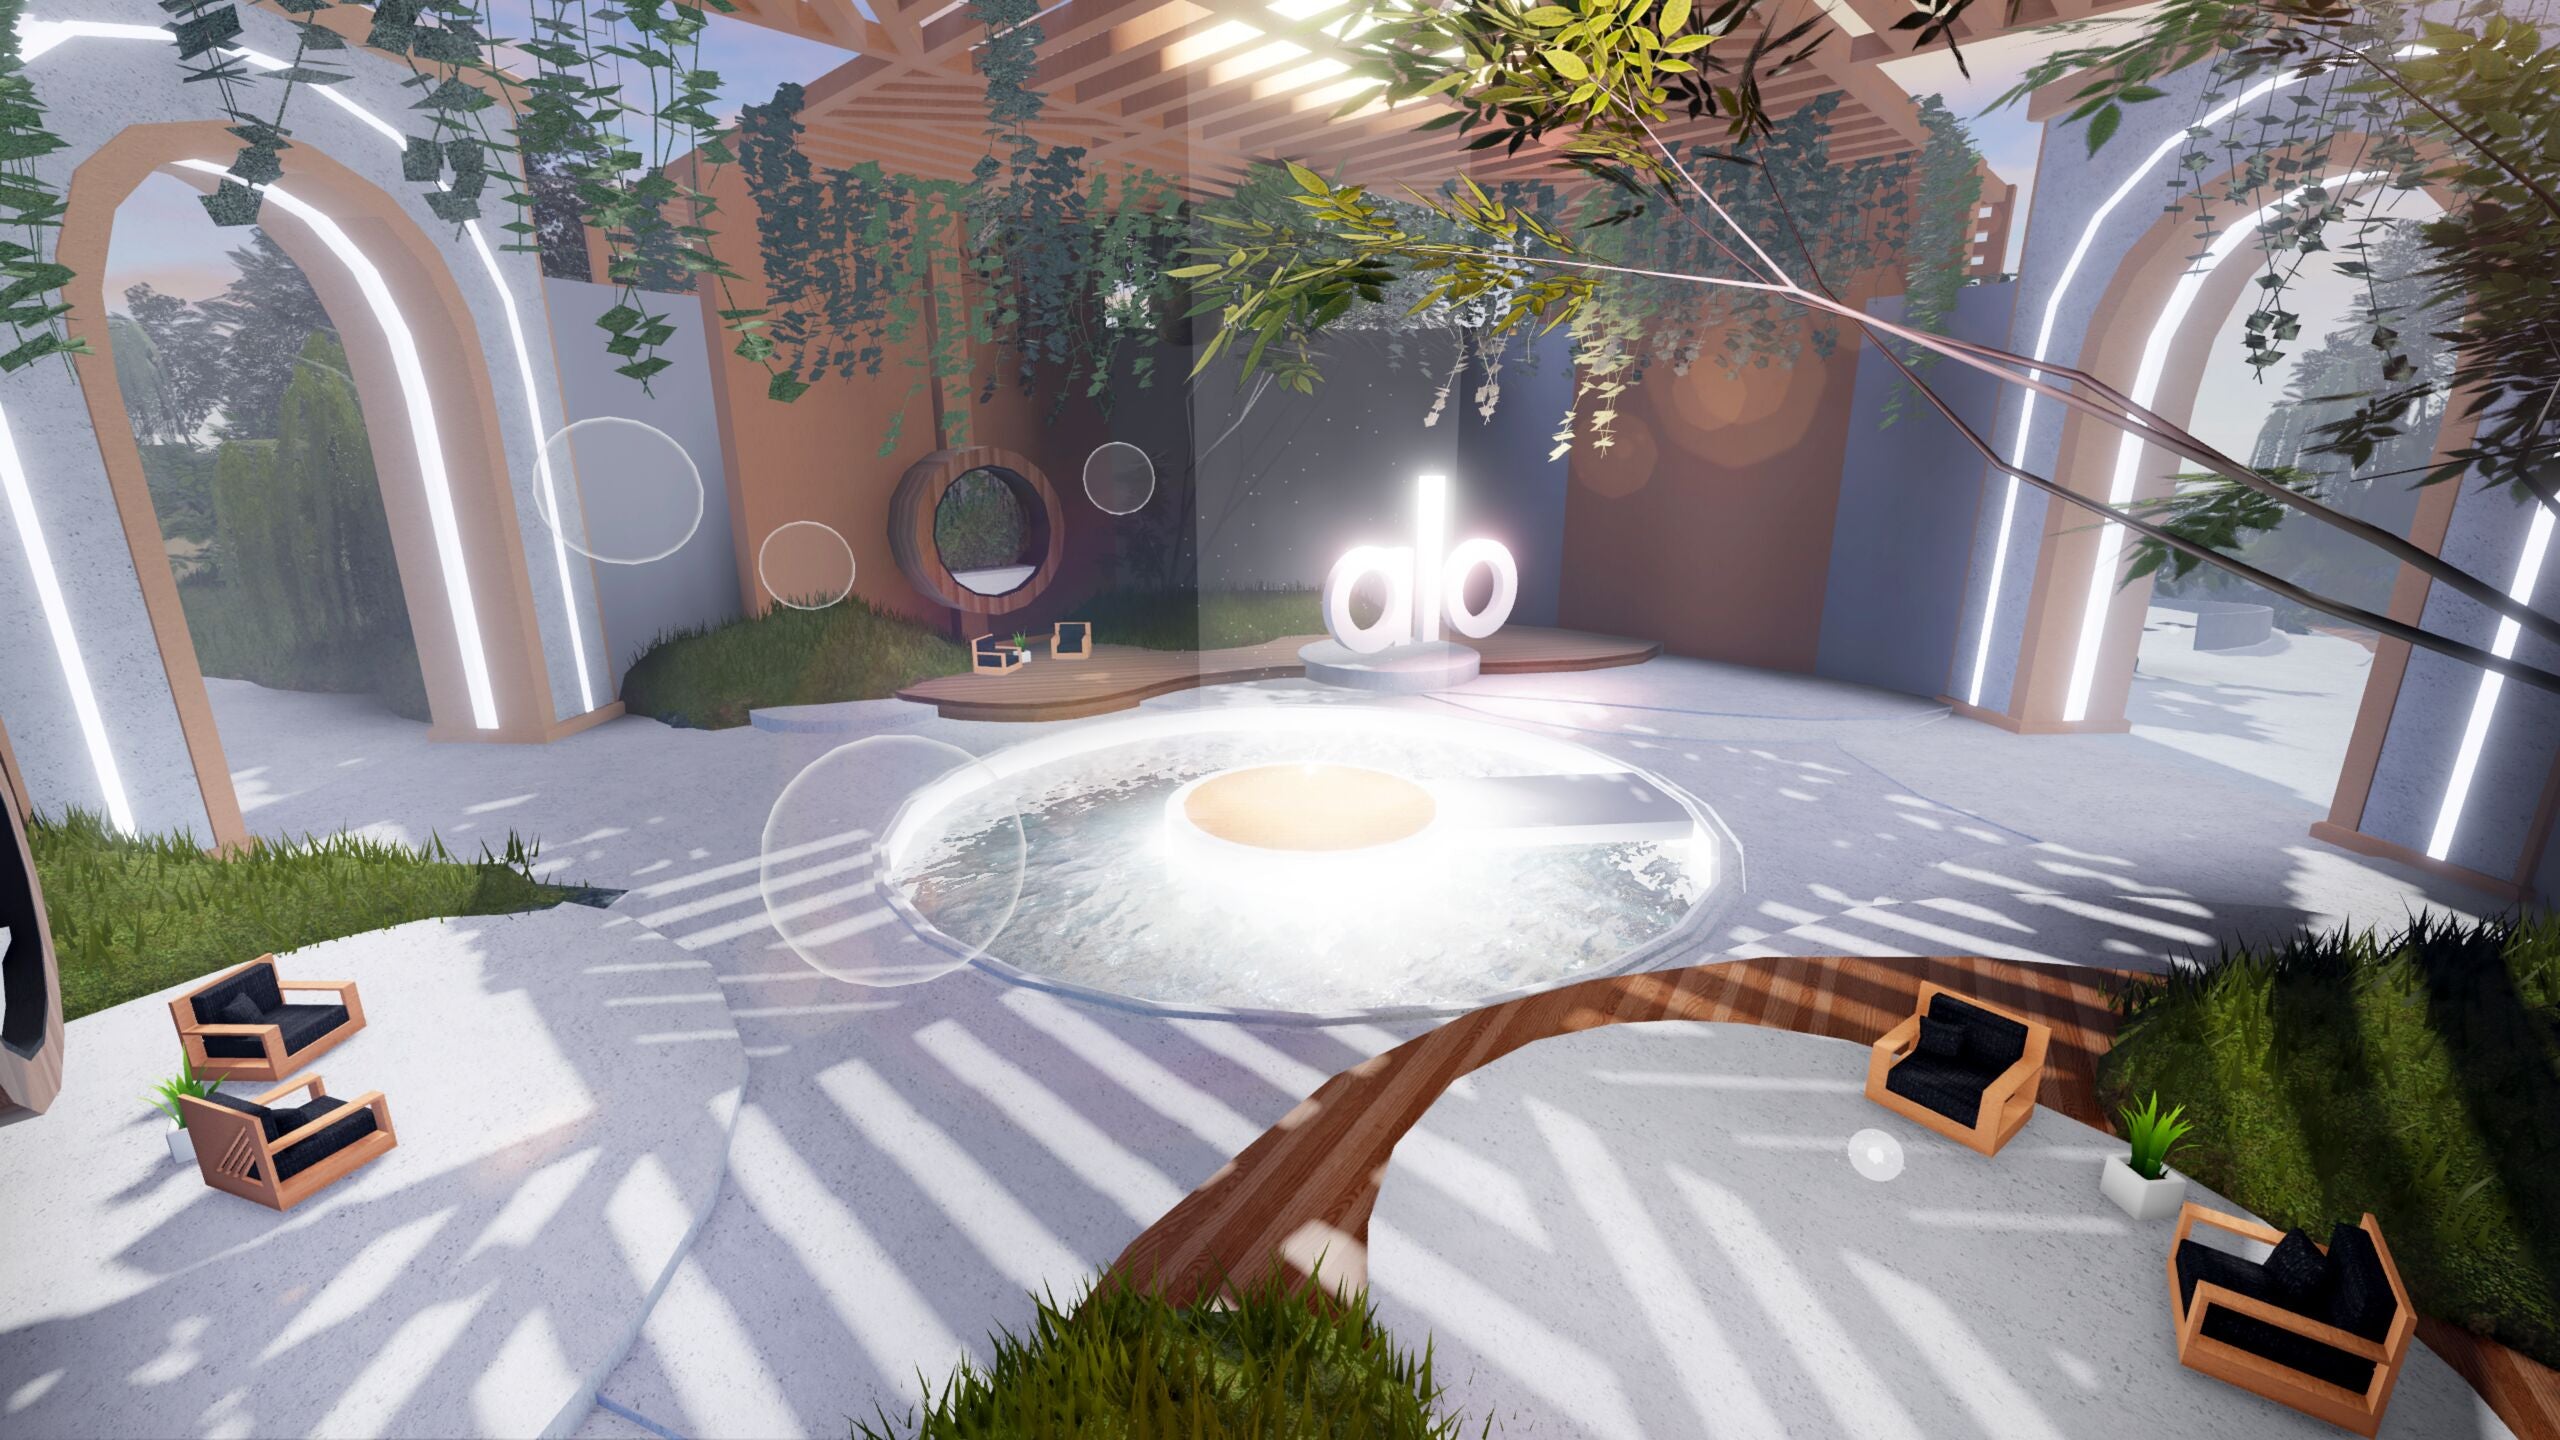 Alo Brings Wellness To The Metaverse With Roblox